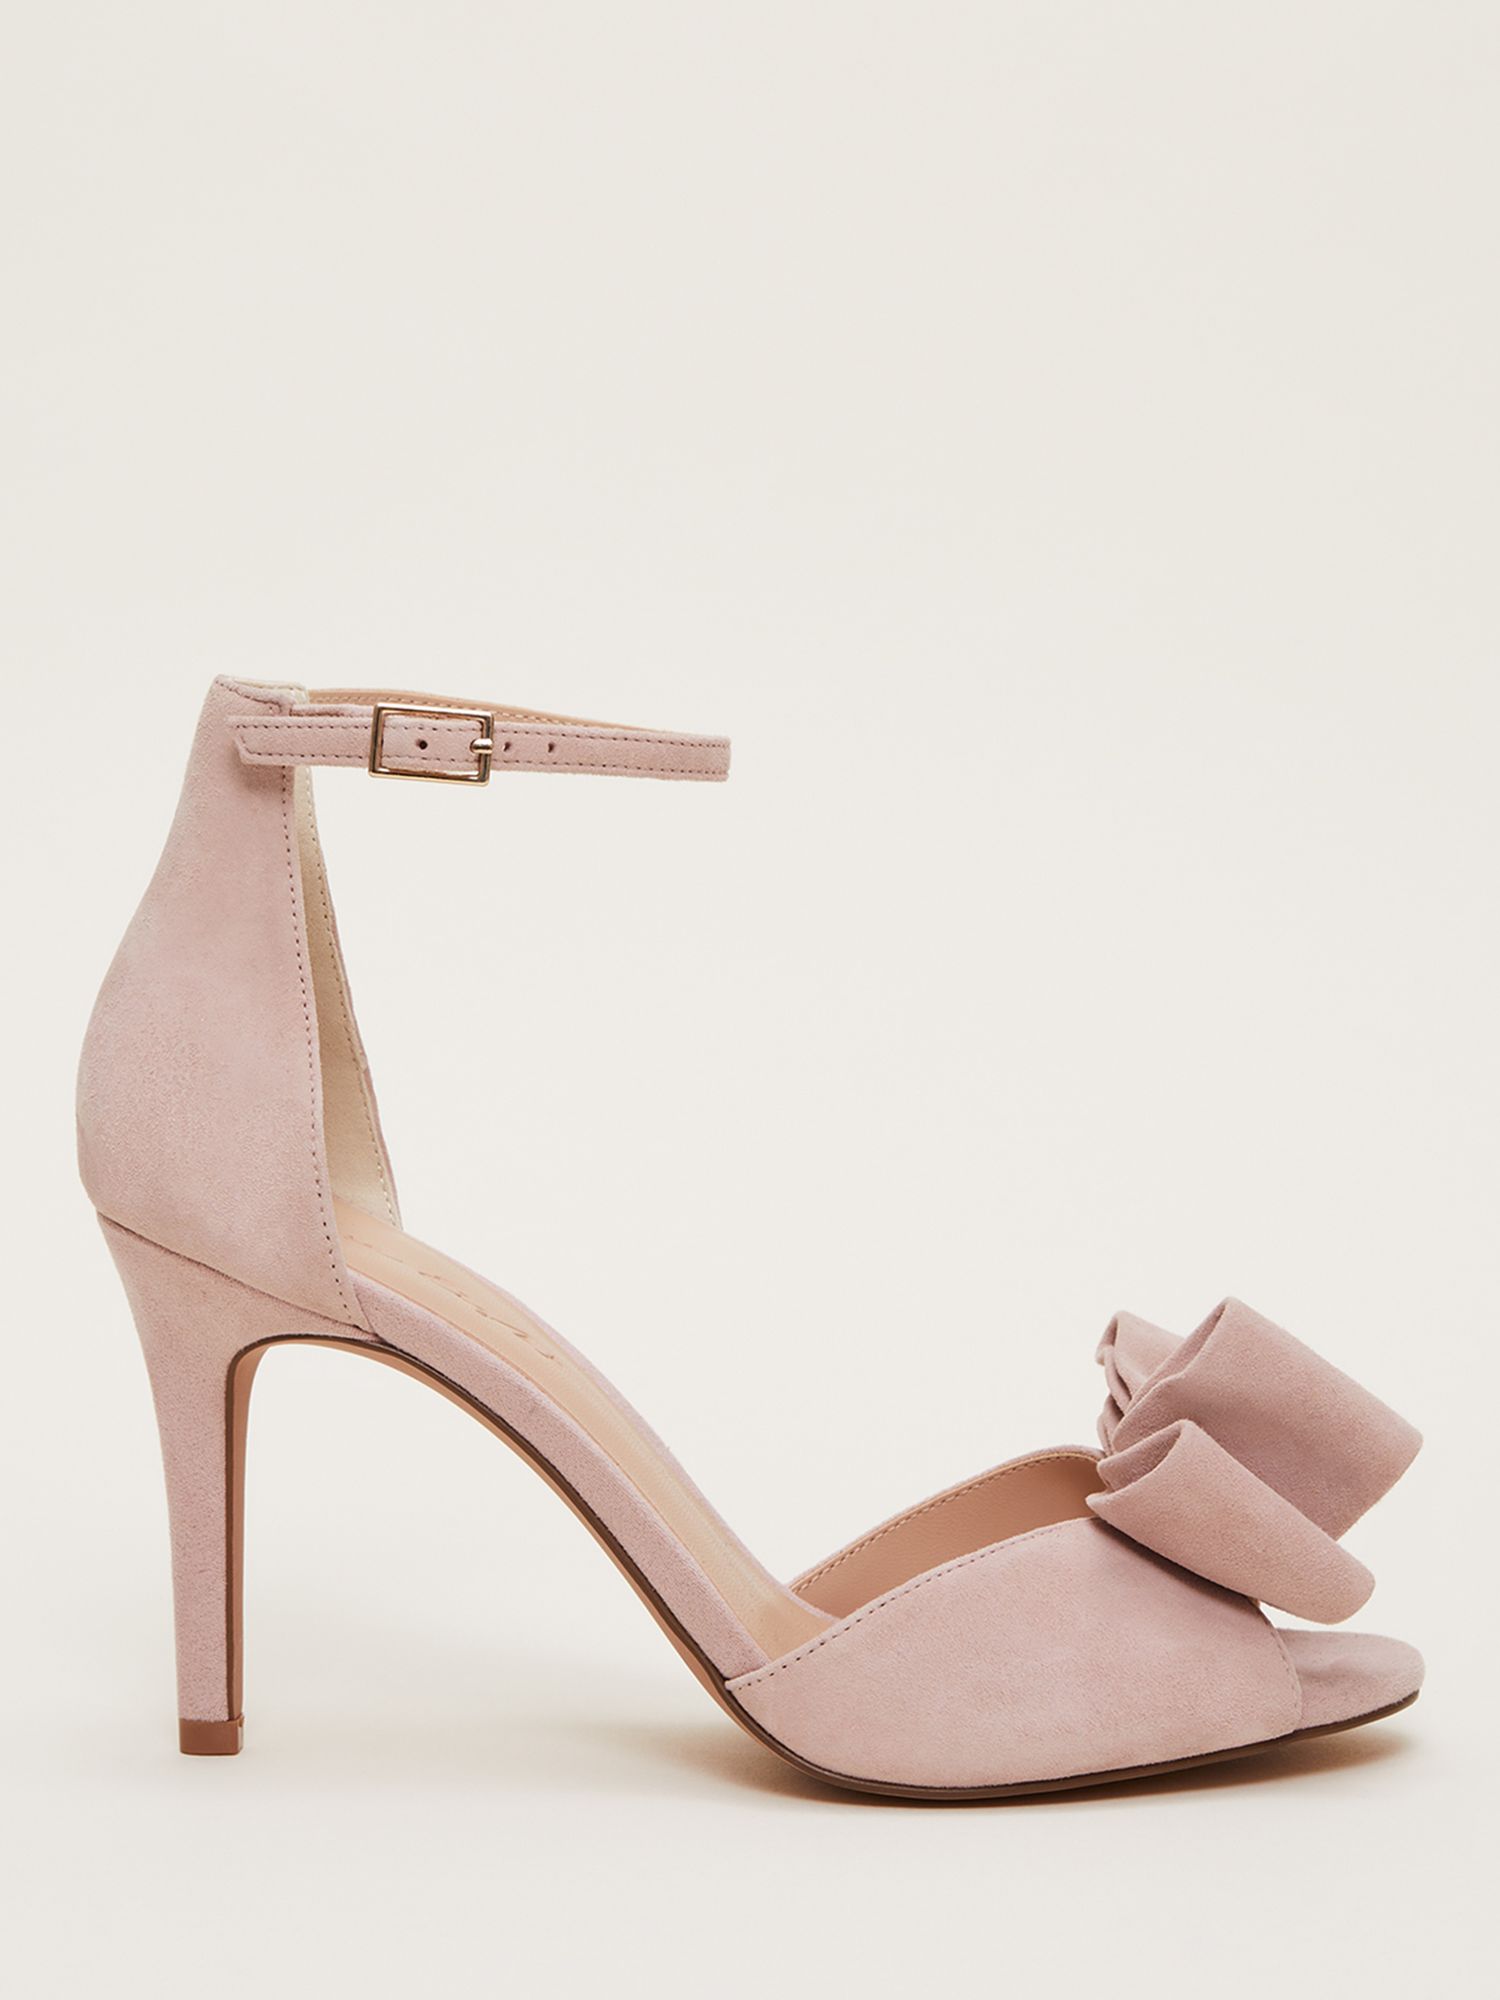 Suede Bow Front High Heel Sandals, Antique Rose at John Lewis & Partners